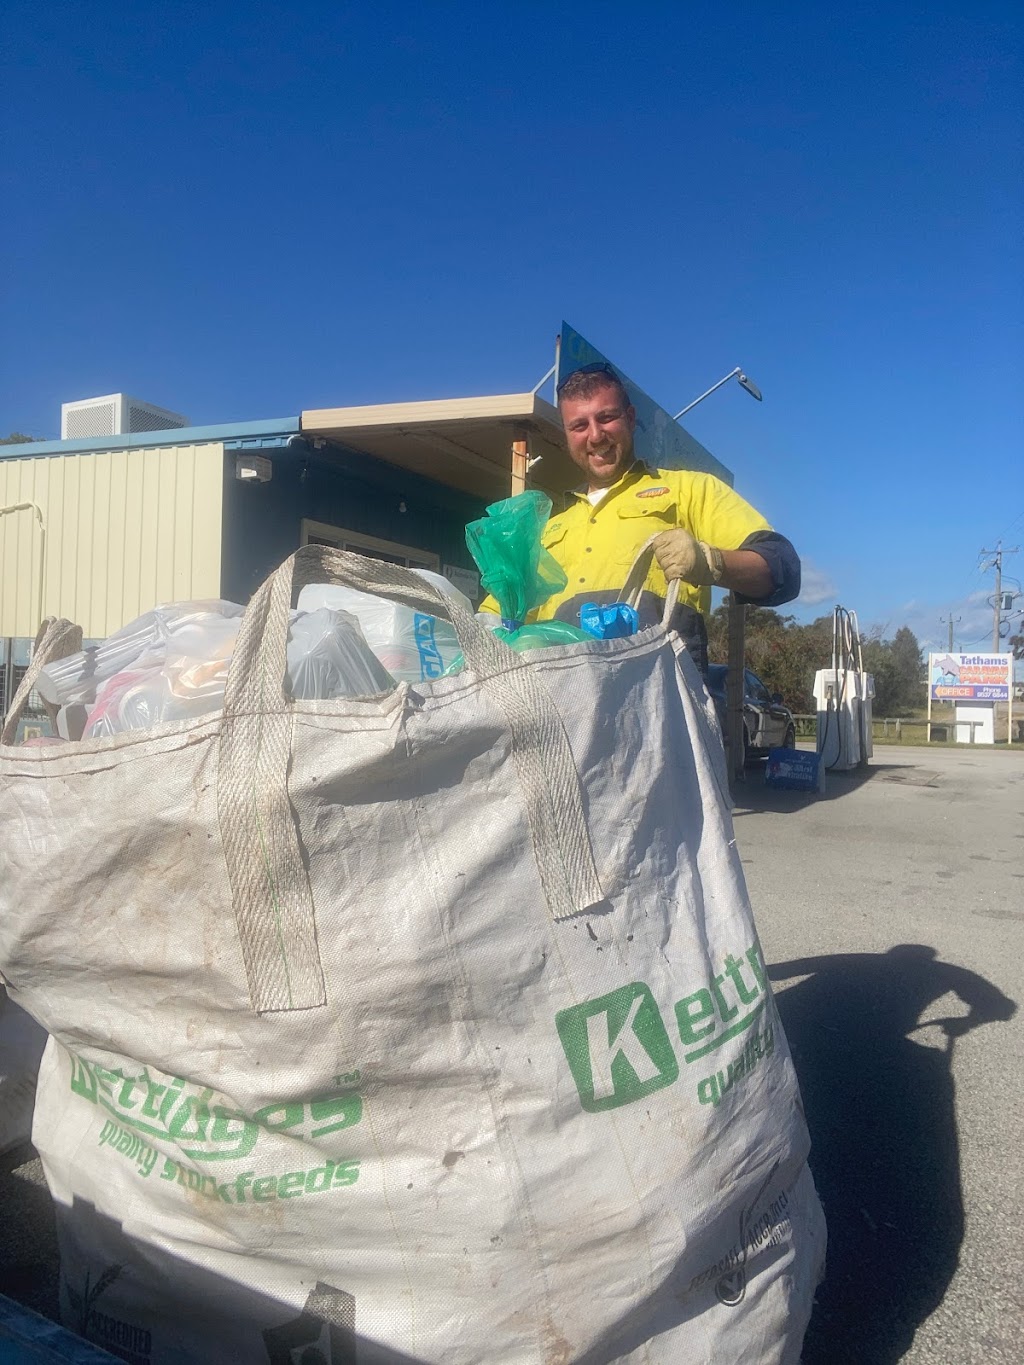 Containers for Change Bag Drop - Ethos Recycling South Yunderup |  | 16 S Yunderup Rd, South Yunderup WA 6208, Australia | 0895301229 OR +61 8 9530 1229